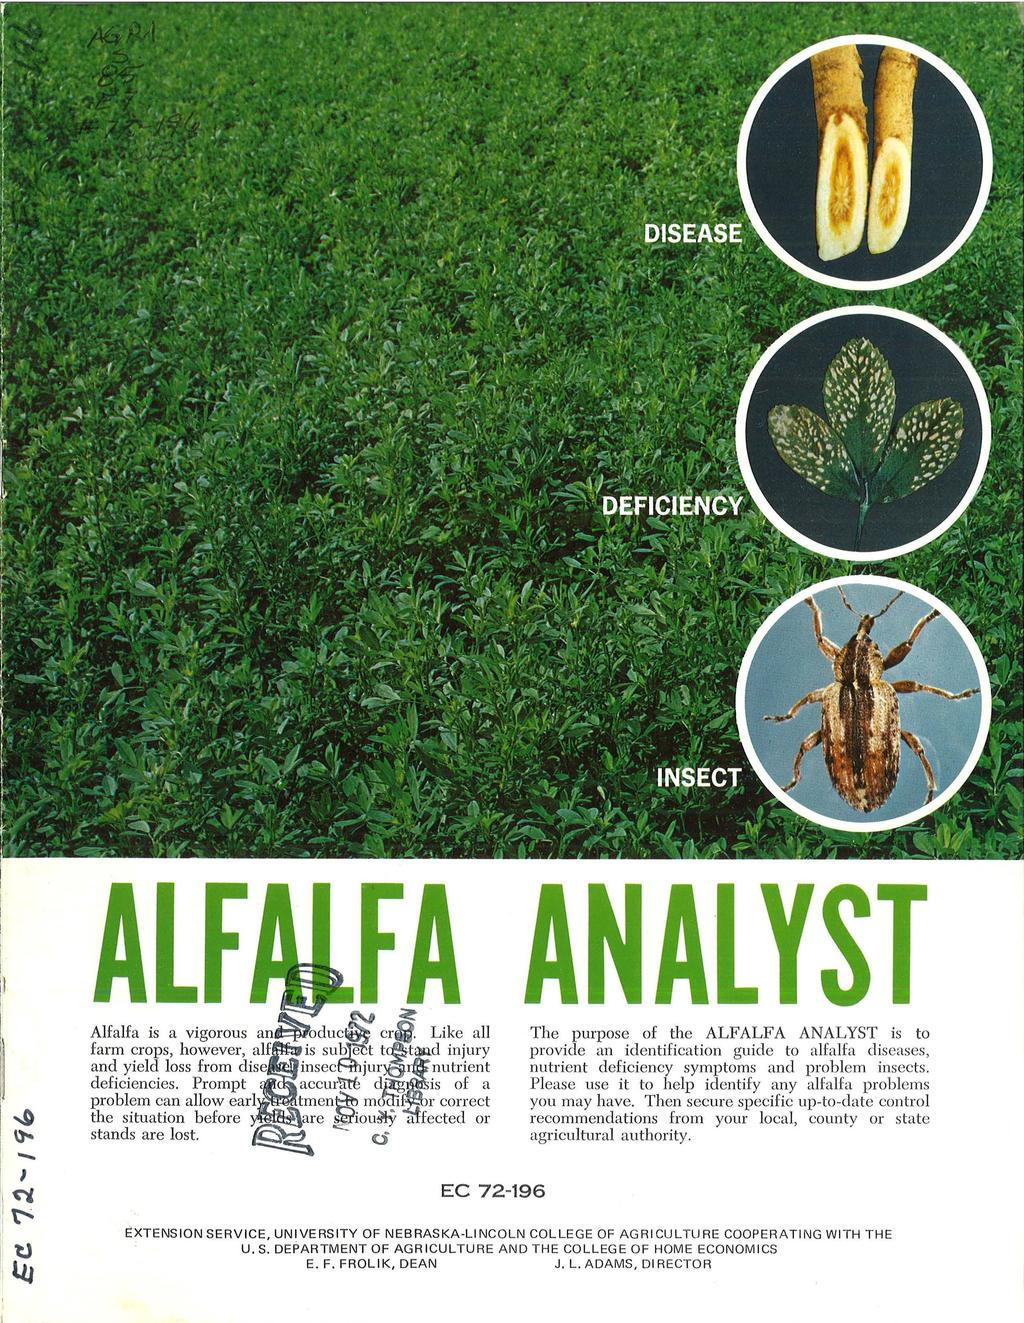 - Alfalfa is a vigorous farm crops, however and yield loss from dise.q ins:ecinflil deficiencies. Prompt problem can allow the situation before stands are lost.